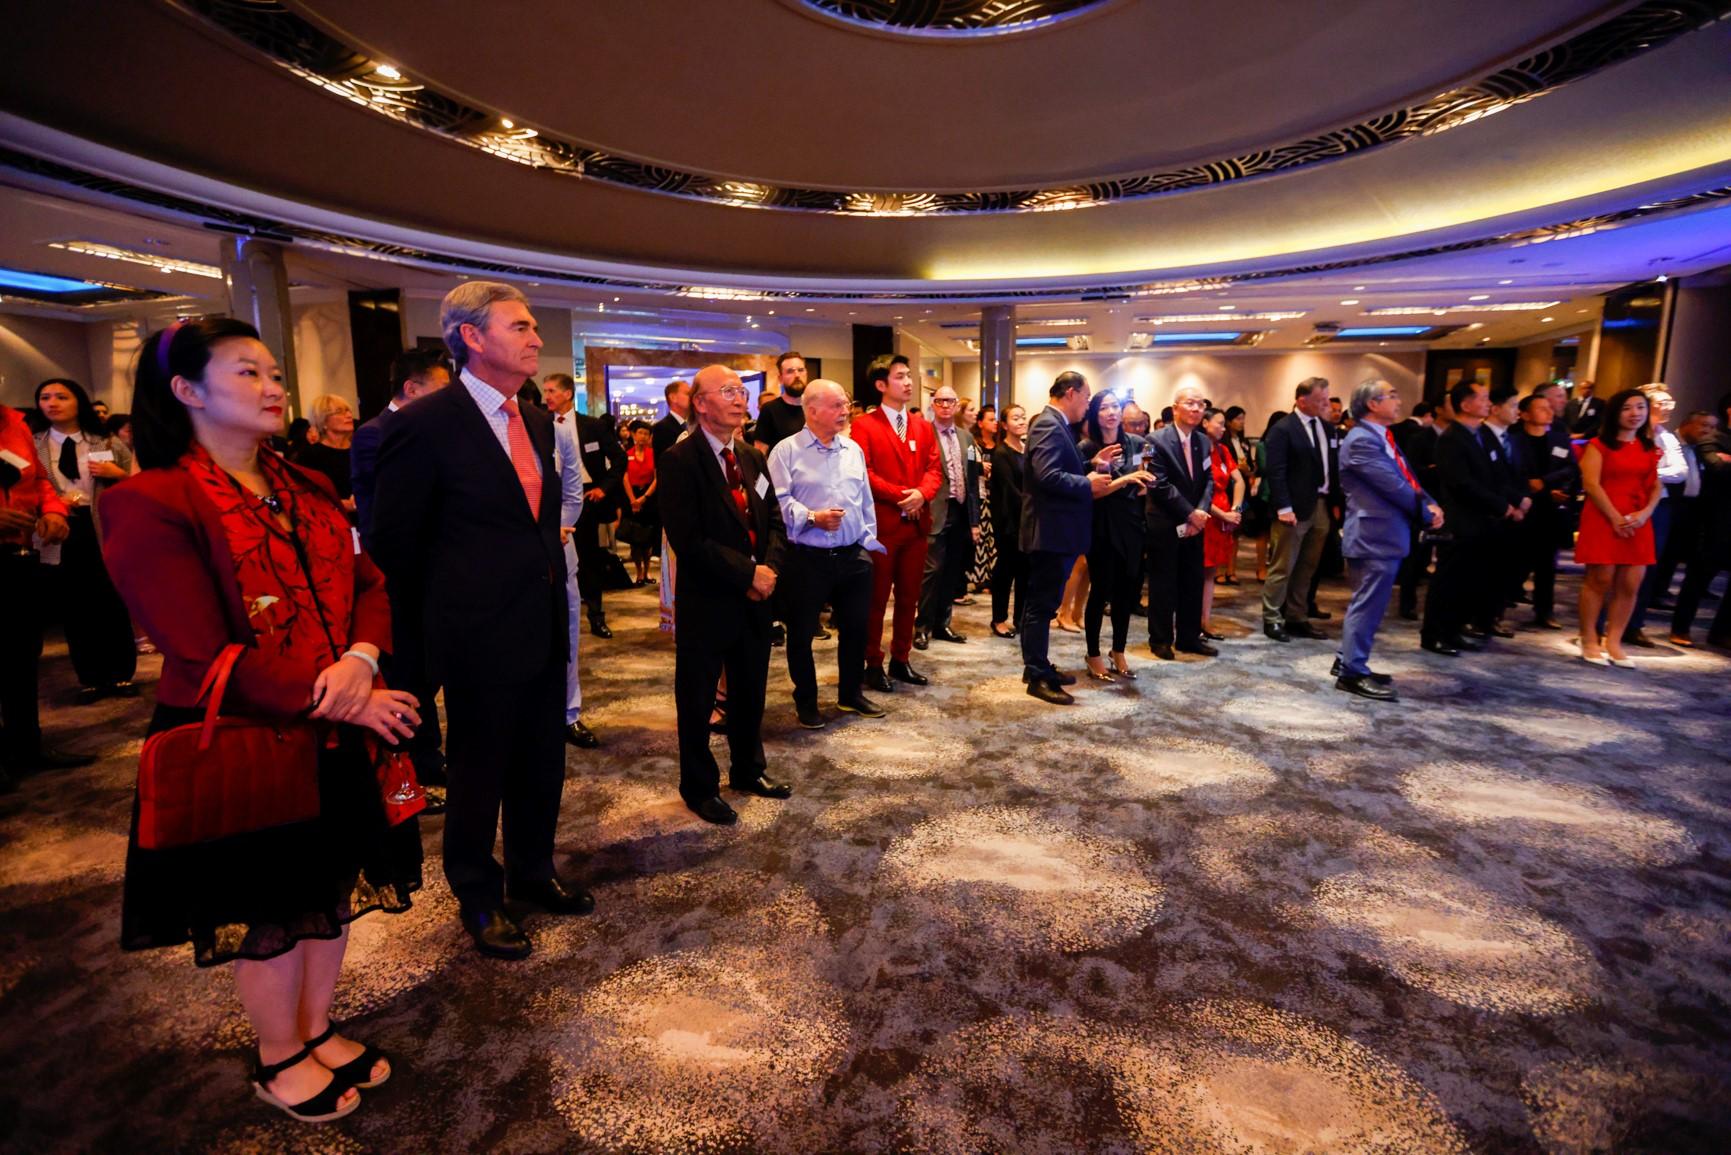 The Hong Kong Economic and Trade Office, Sydney hosted a reception in Melbourne, Australia, today (February 15) to celebrate the Year of the Rabbit. Over 200 guests from various sectors including political and business circles, media, academic and community groups as well as government representatives attended the reception.